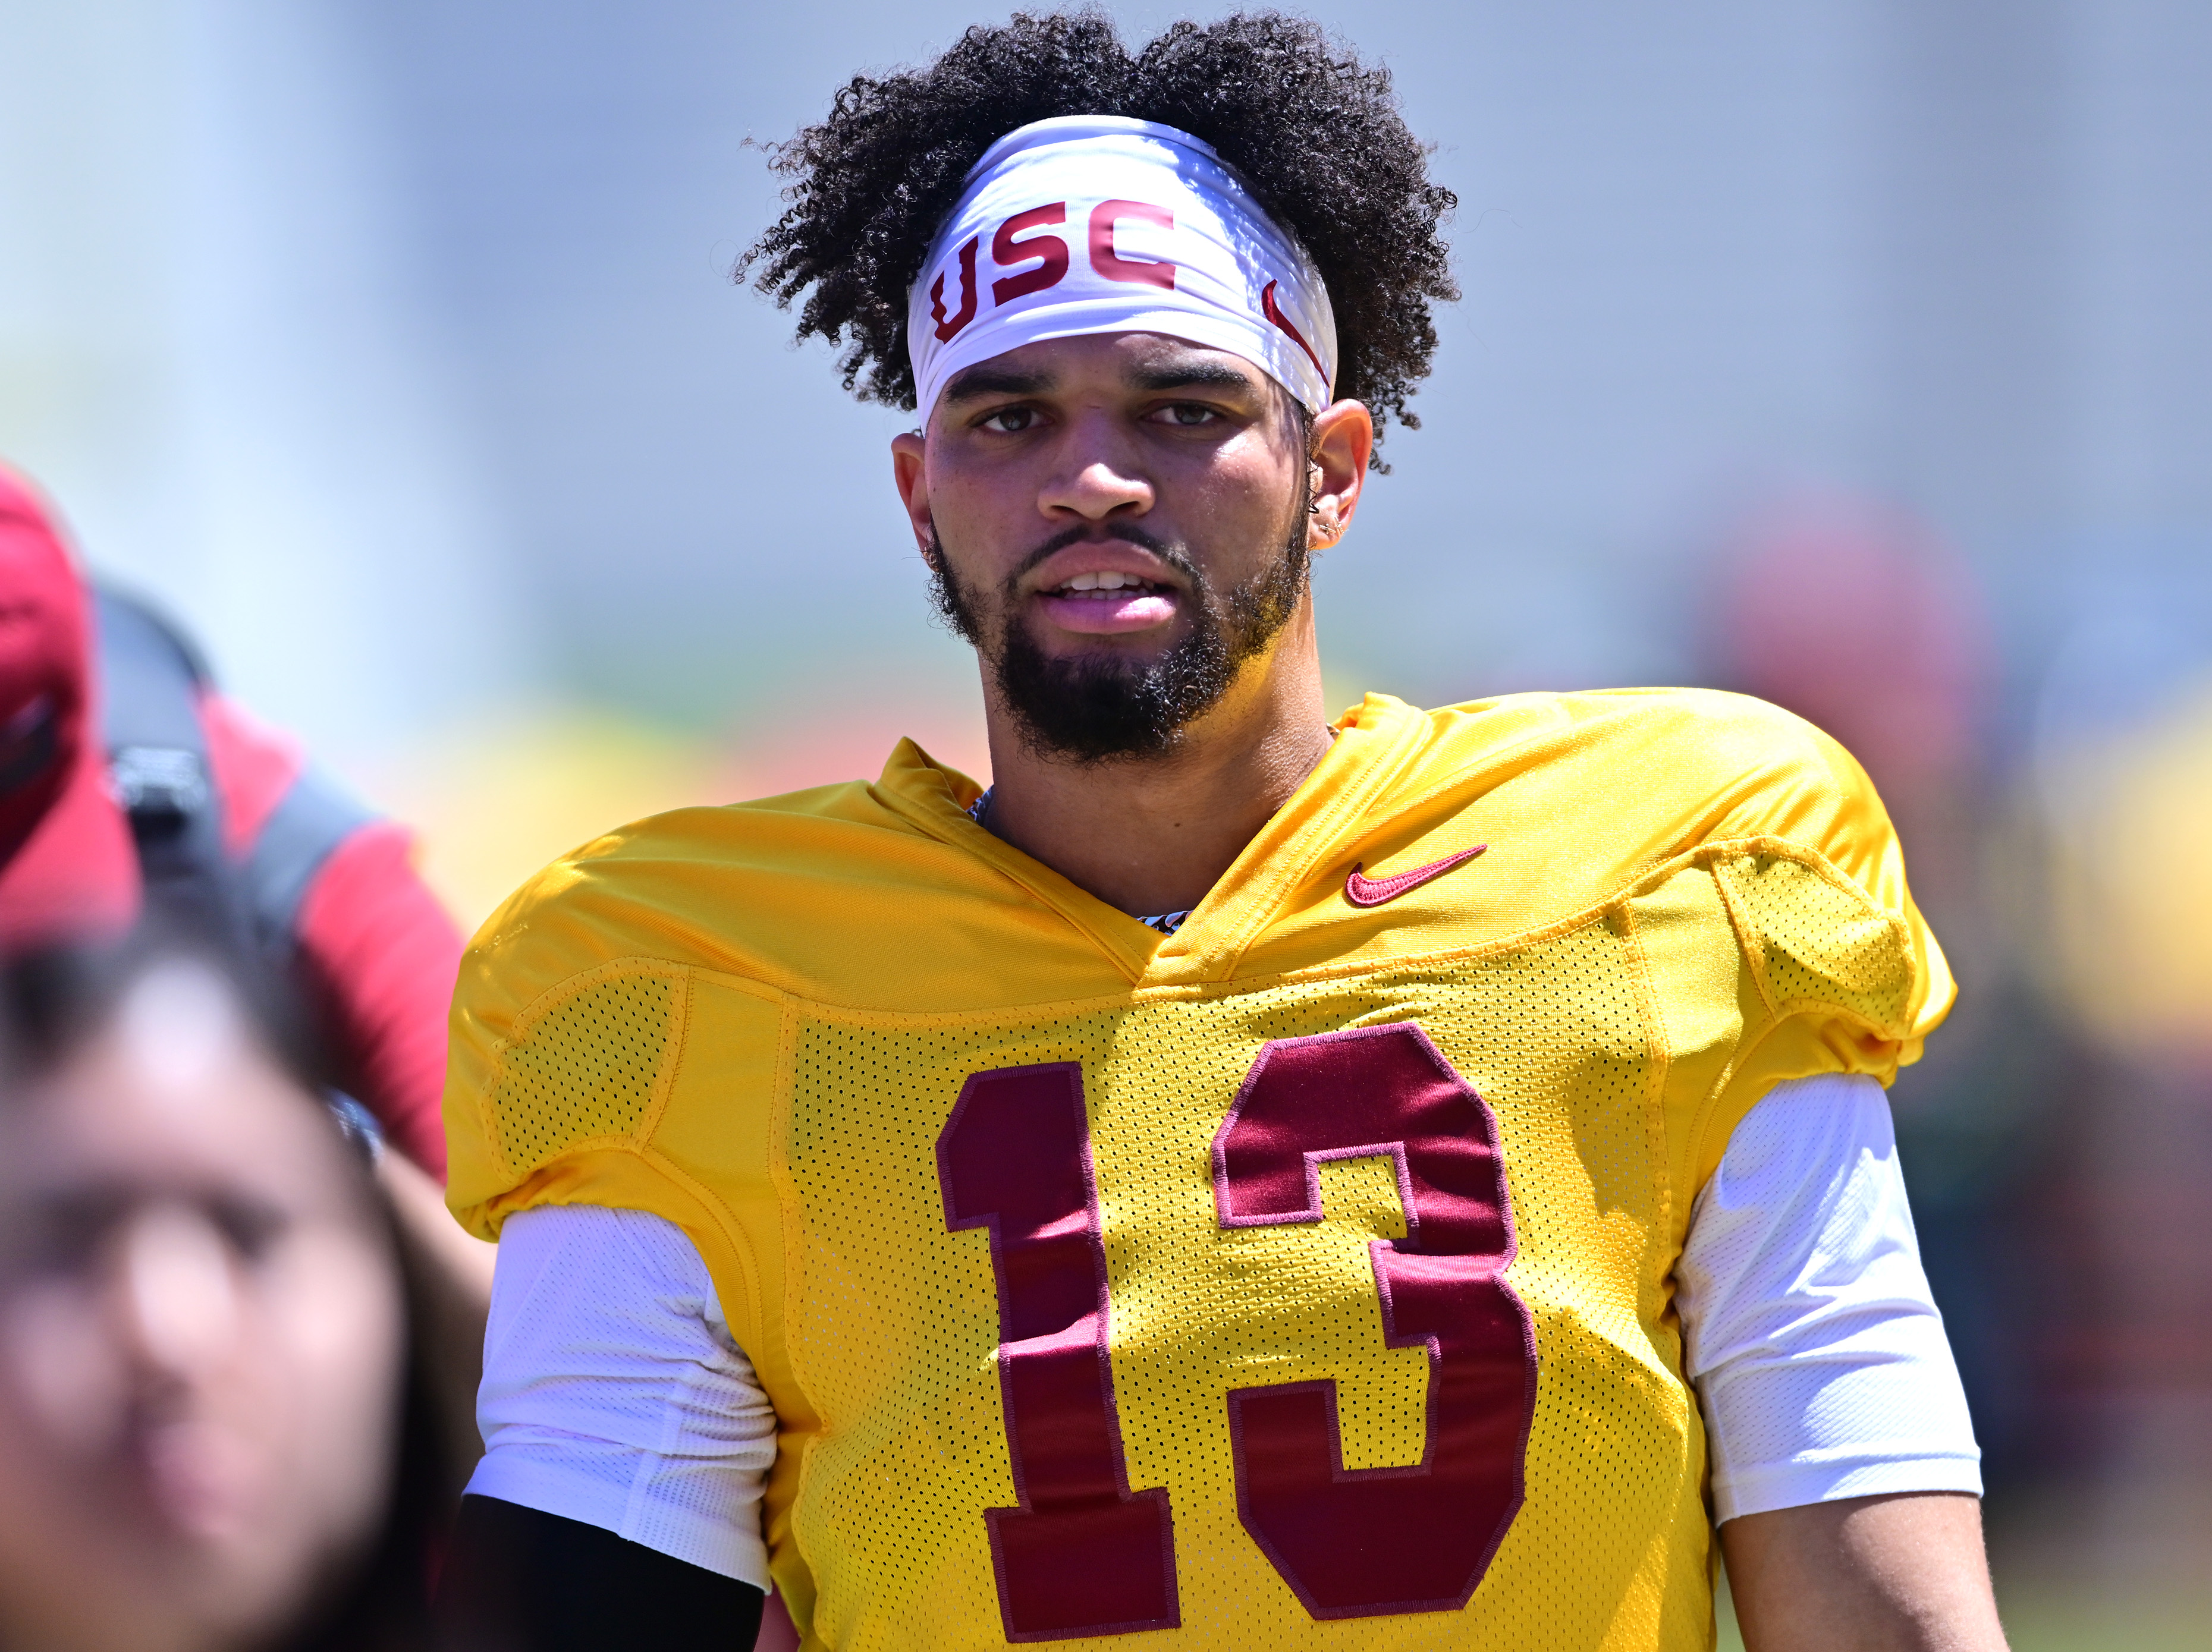 Quarterback Caleb Williams of the USC Trojans warms up during the 2022 USC Spring Football game at Los Angeles Memorial Coliseum on April 23, 2022 in Los Angeles, California.